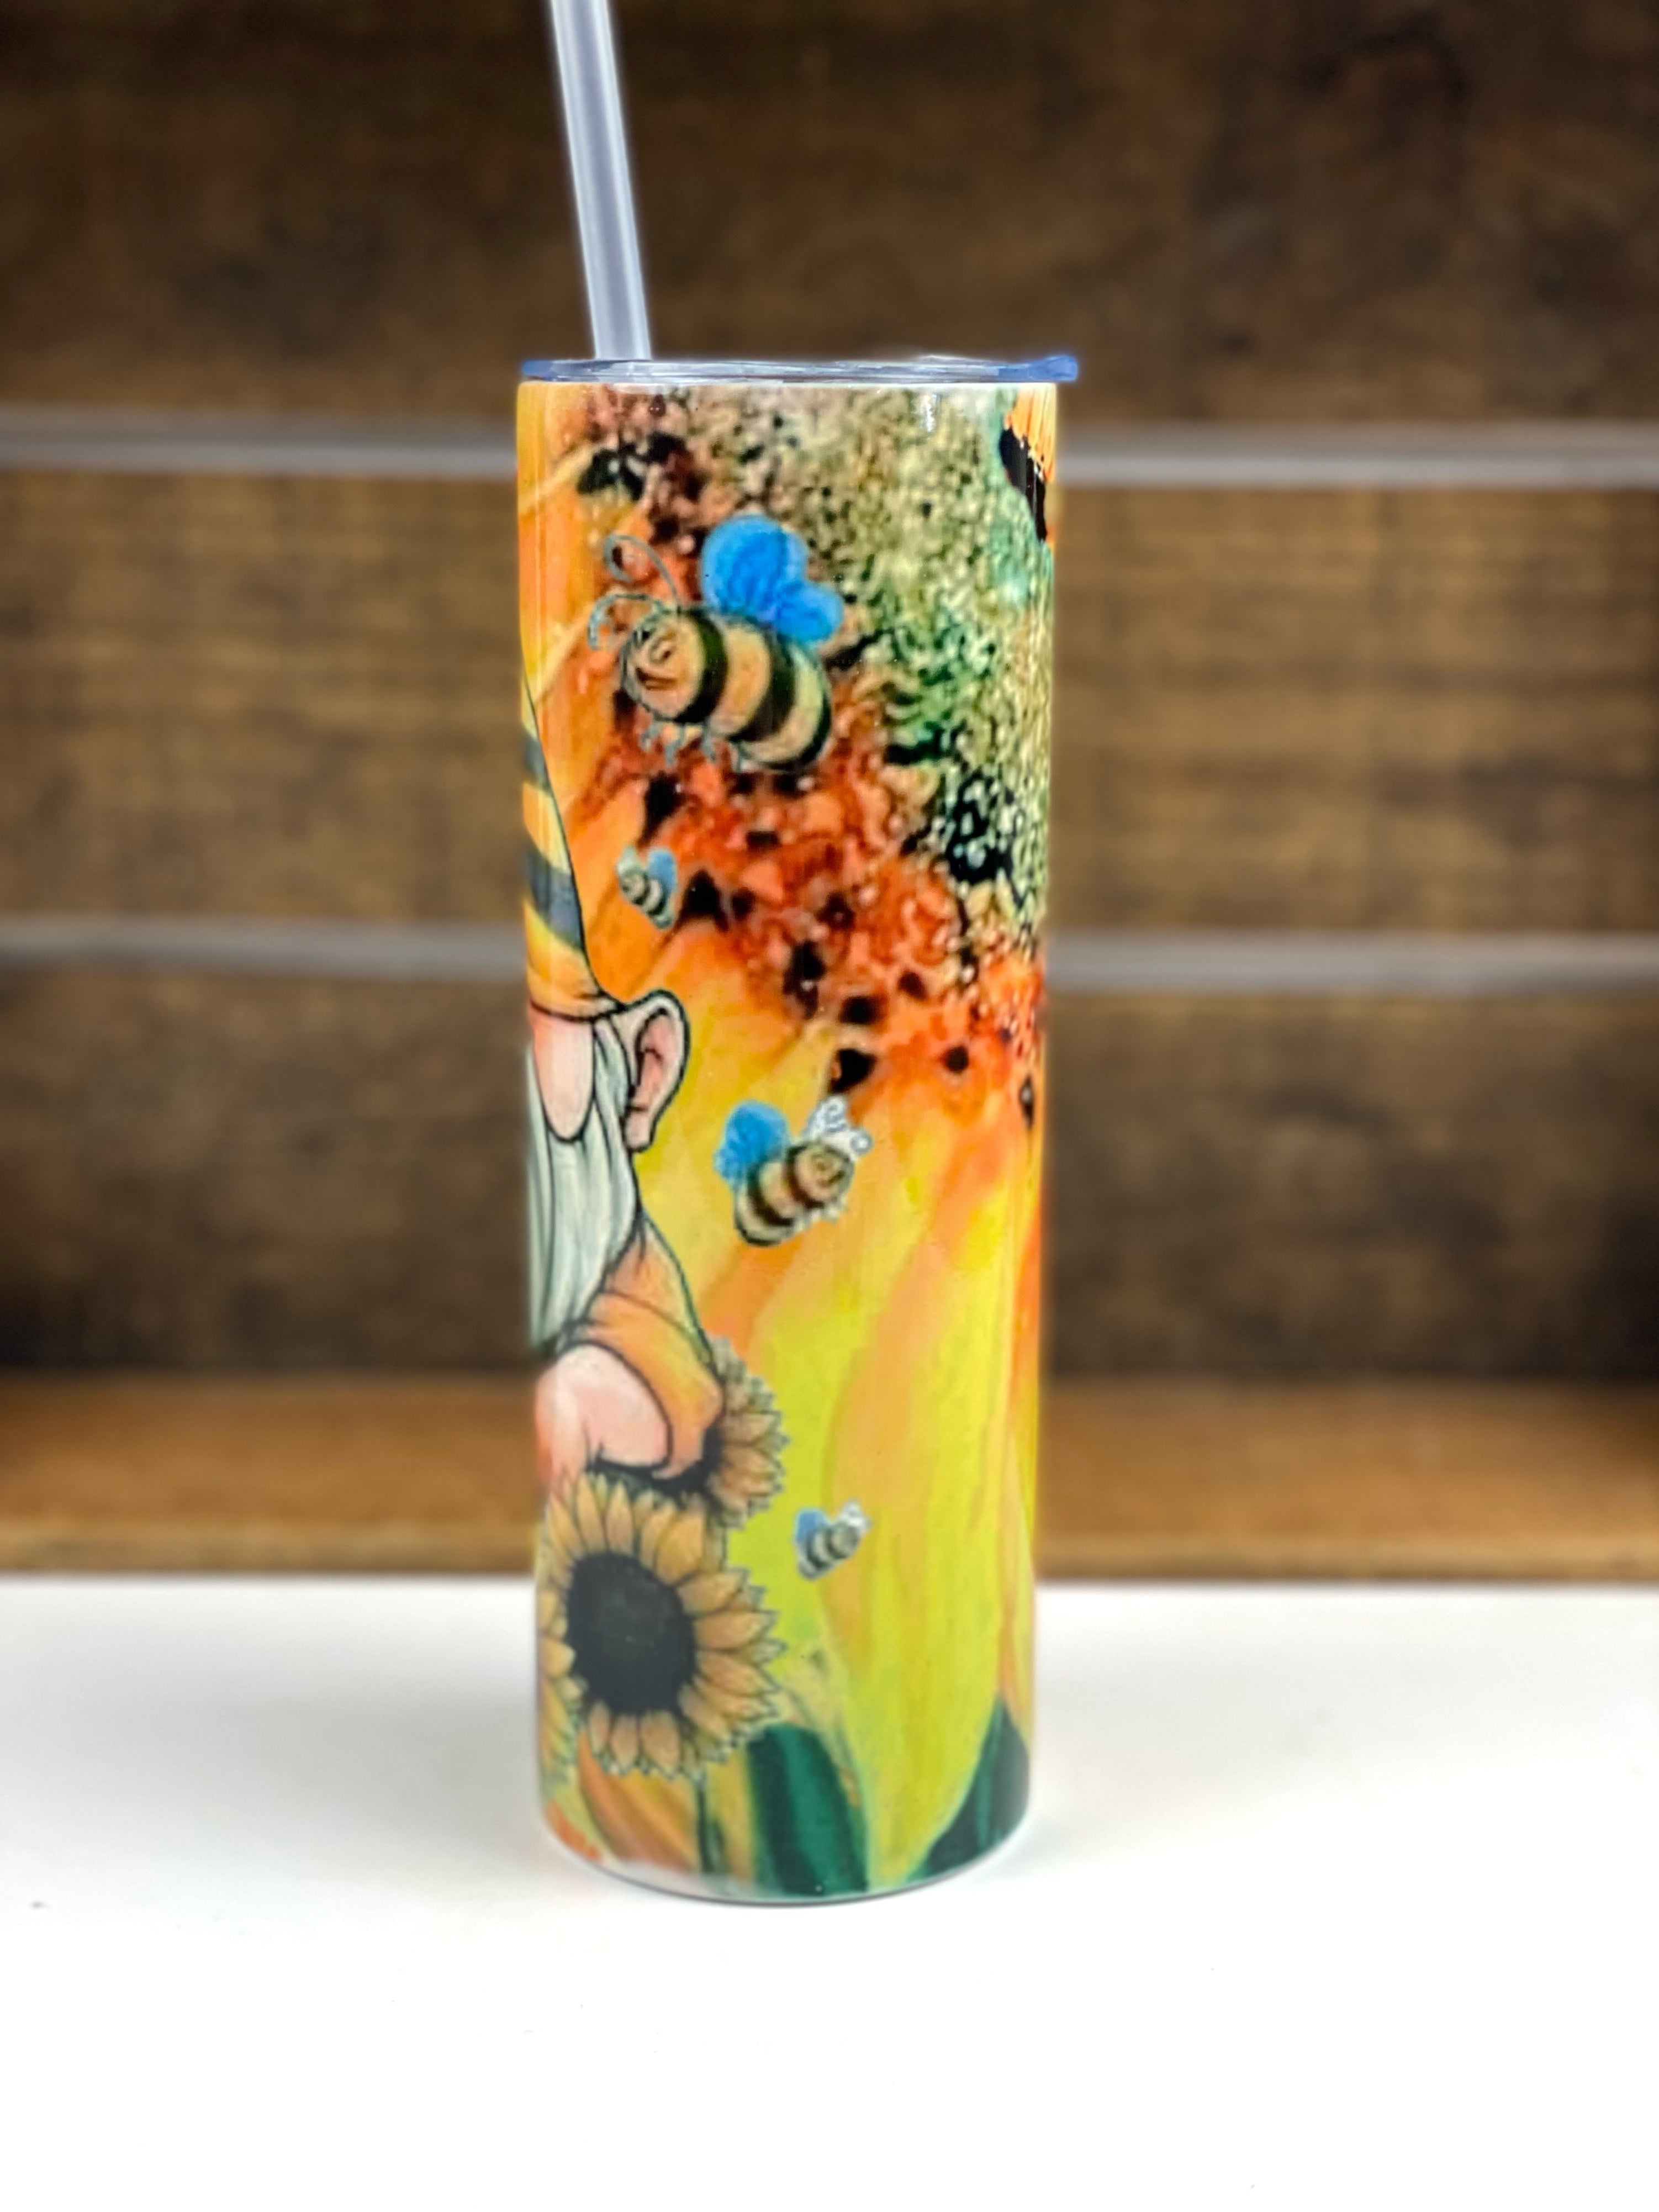 Gnome Sunflowers Honey Bees 20 oz Stainless Steel Skinny Tumbler Sublimation Hot Cold Coffee Soda